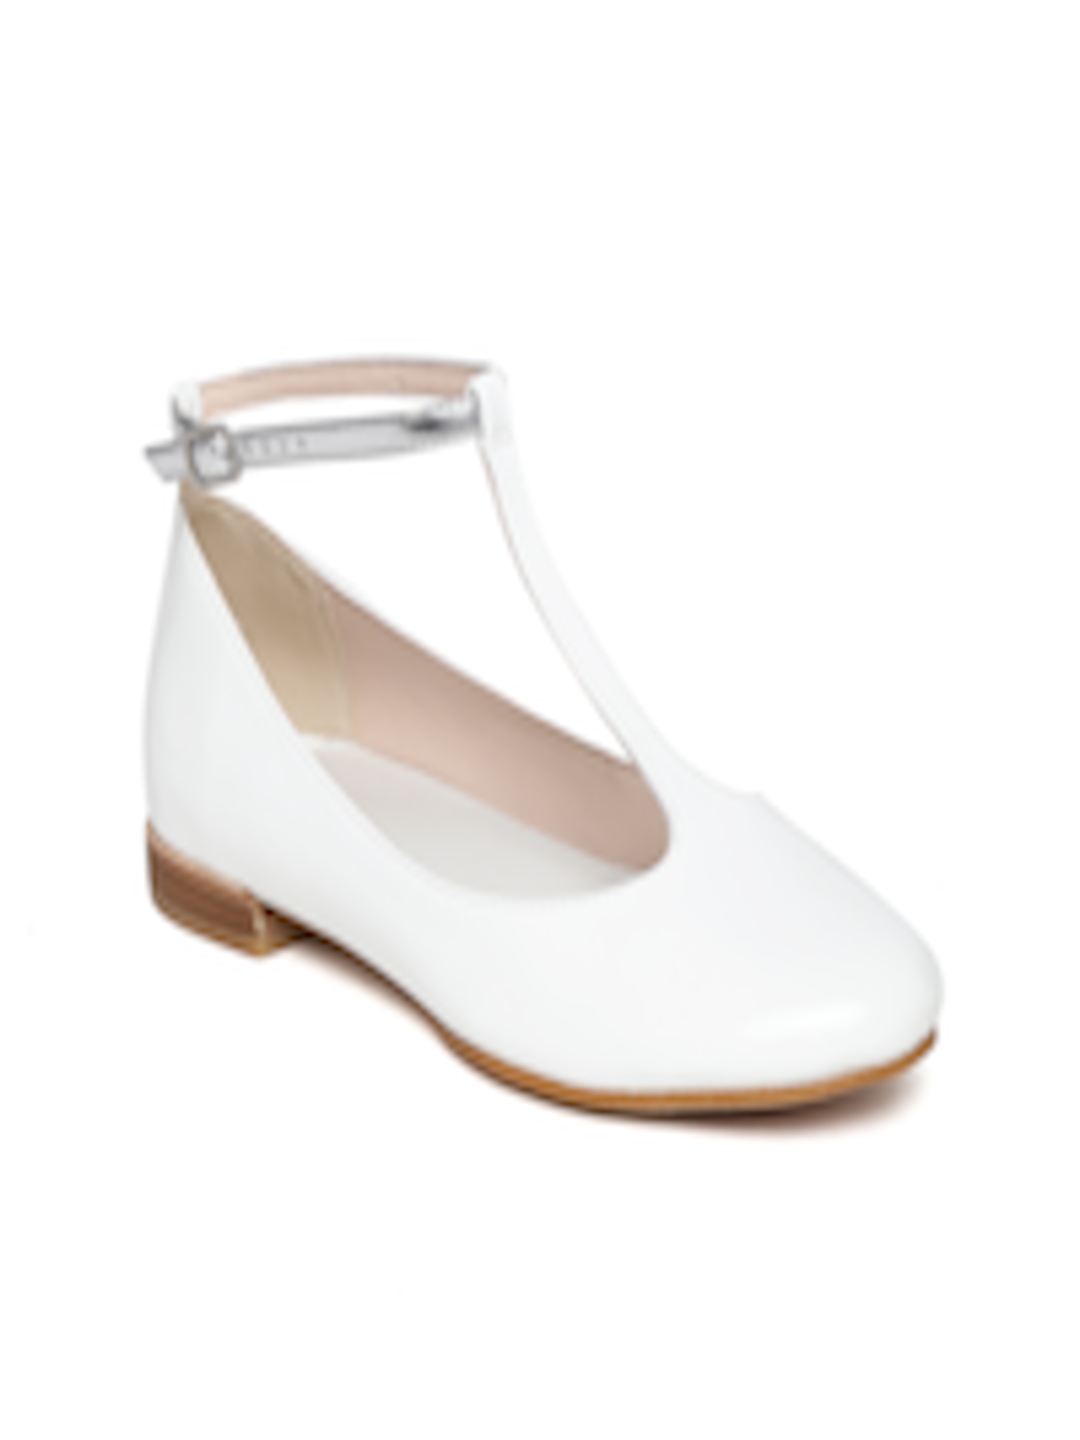 Buy Clarks Women White Patent Leather Flats - Flats for Women 1120445 ...